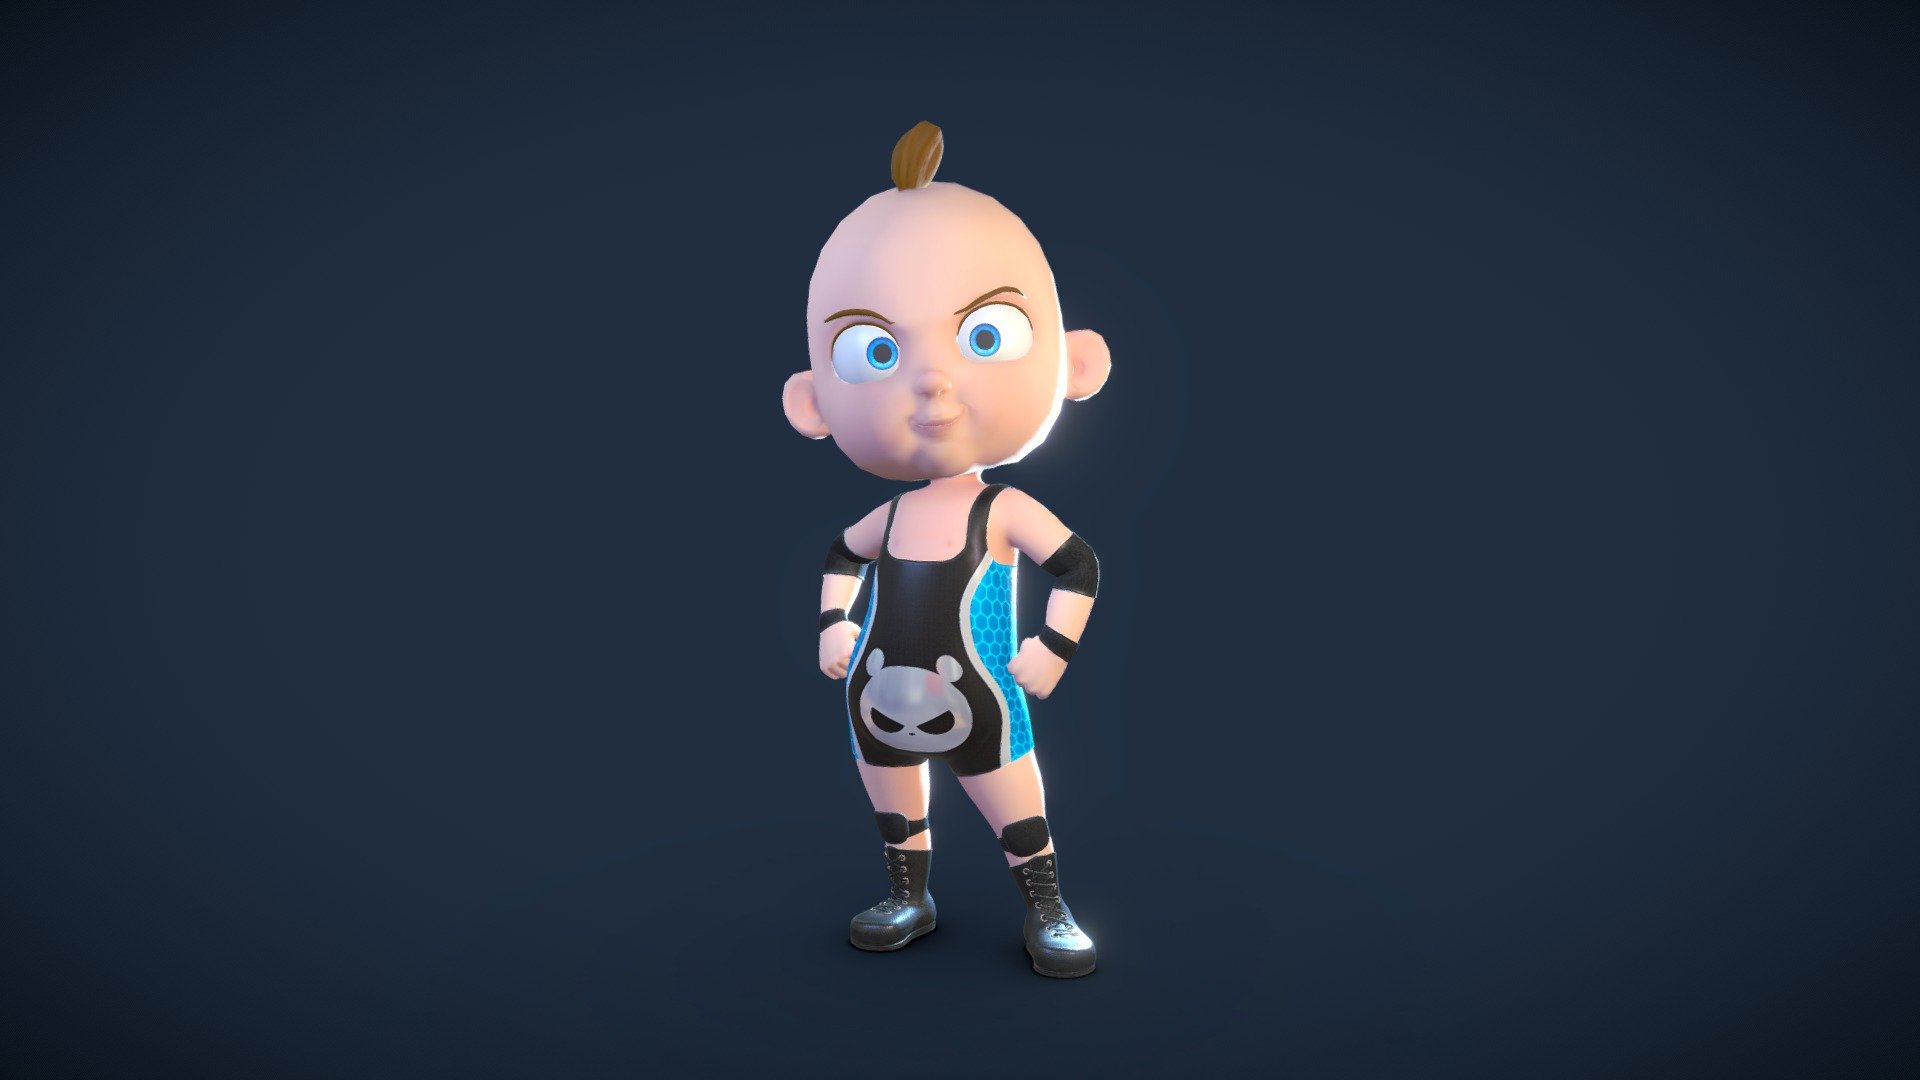 This little wrestler is a great fighter above the ring, he's fast and slippery, his parents are big legends in the wrestler world, and he'll be a big wrestler one day too.
You can see the whole project here.
https://www.artstation.com/artwork/ZG6dOX

Buy and get the sketchfab model, Pose A model and mask with textures - Baby Wrestler - Buy Royalty Free 3D model by efrenfreeze 3d model